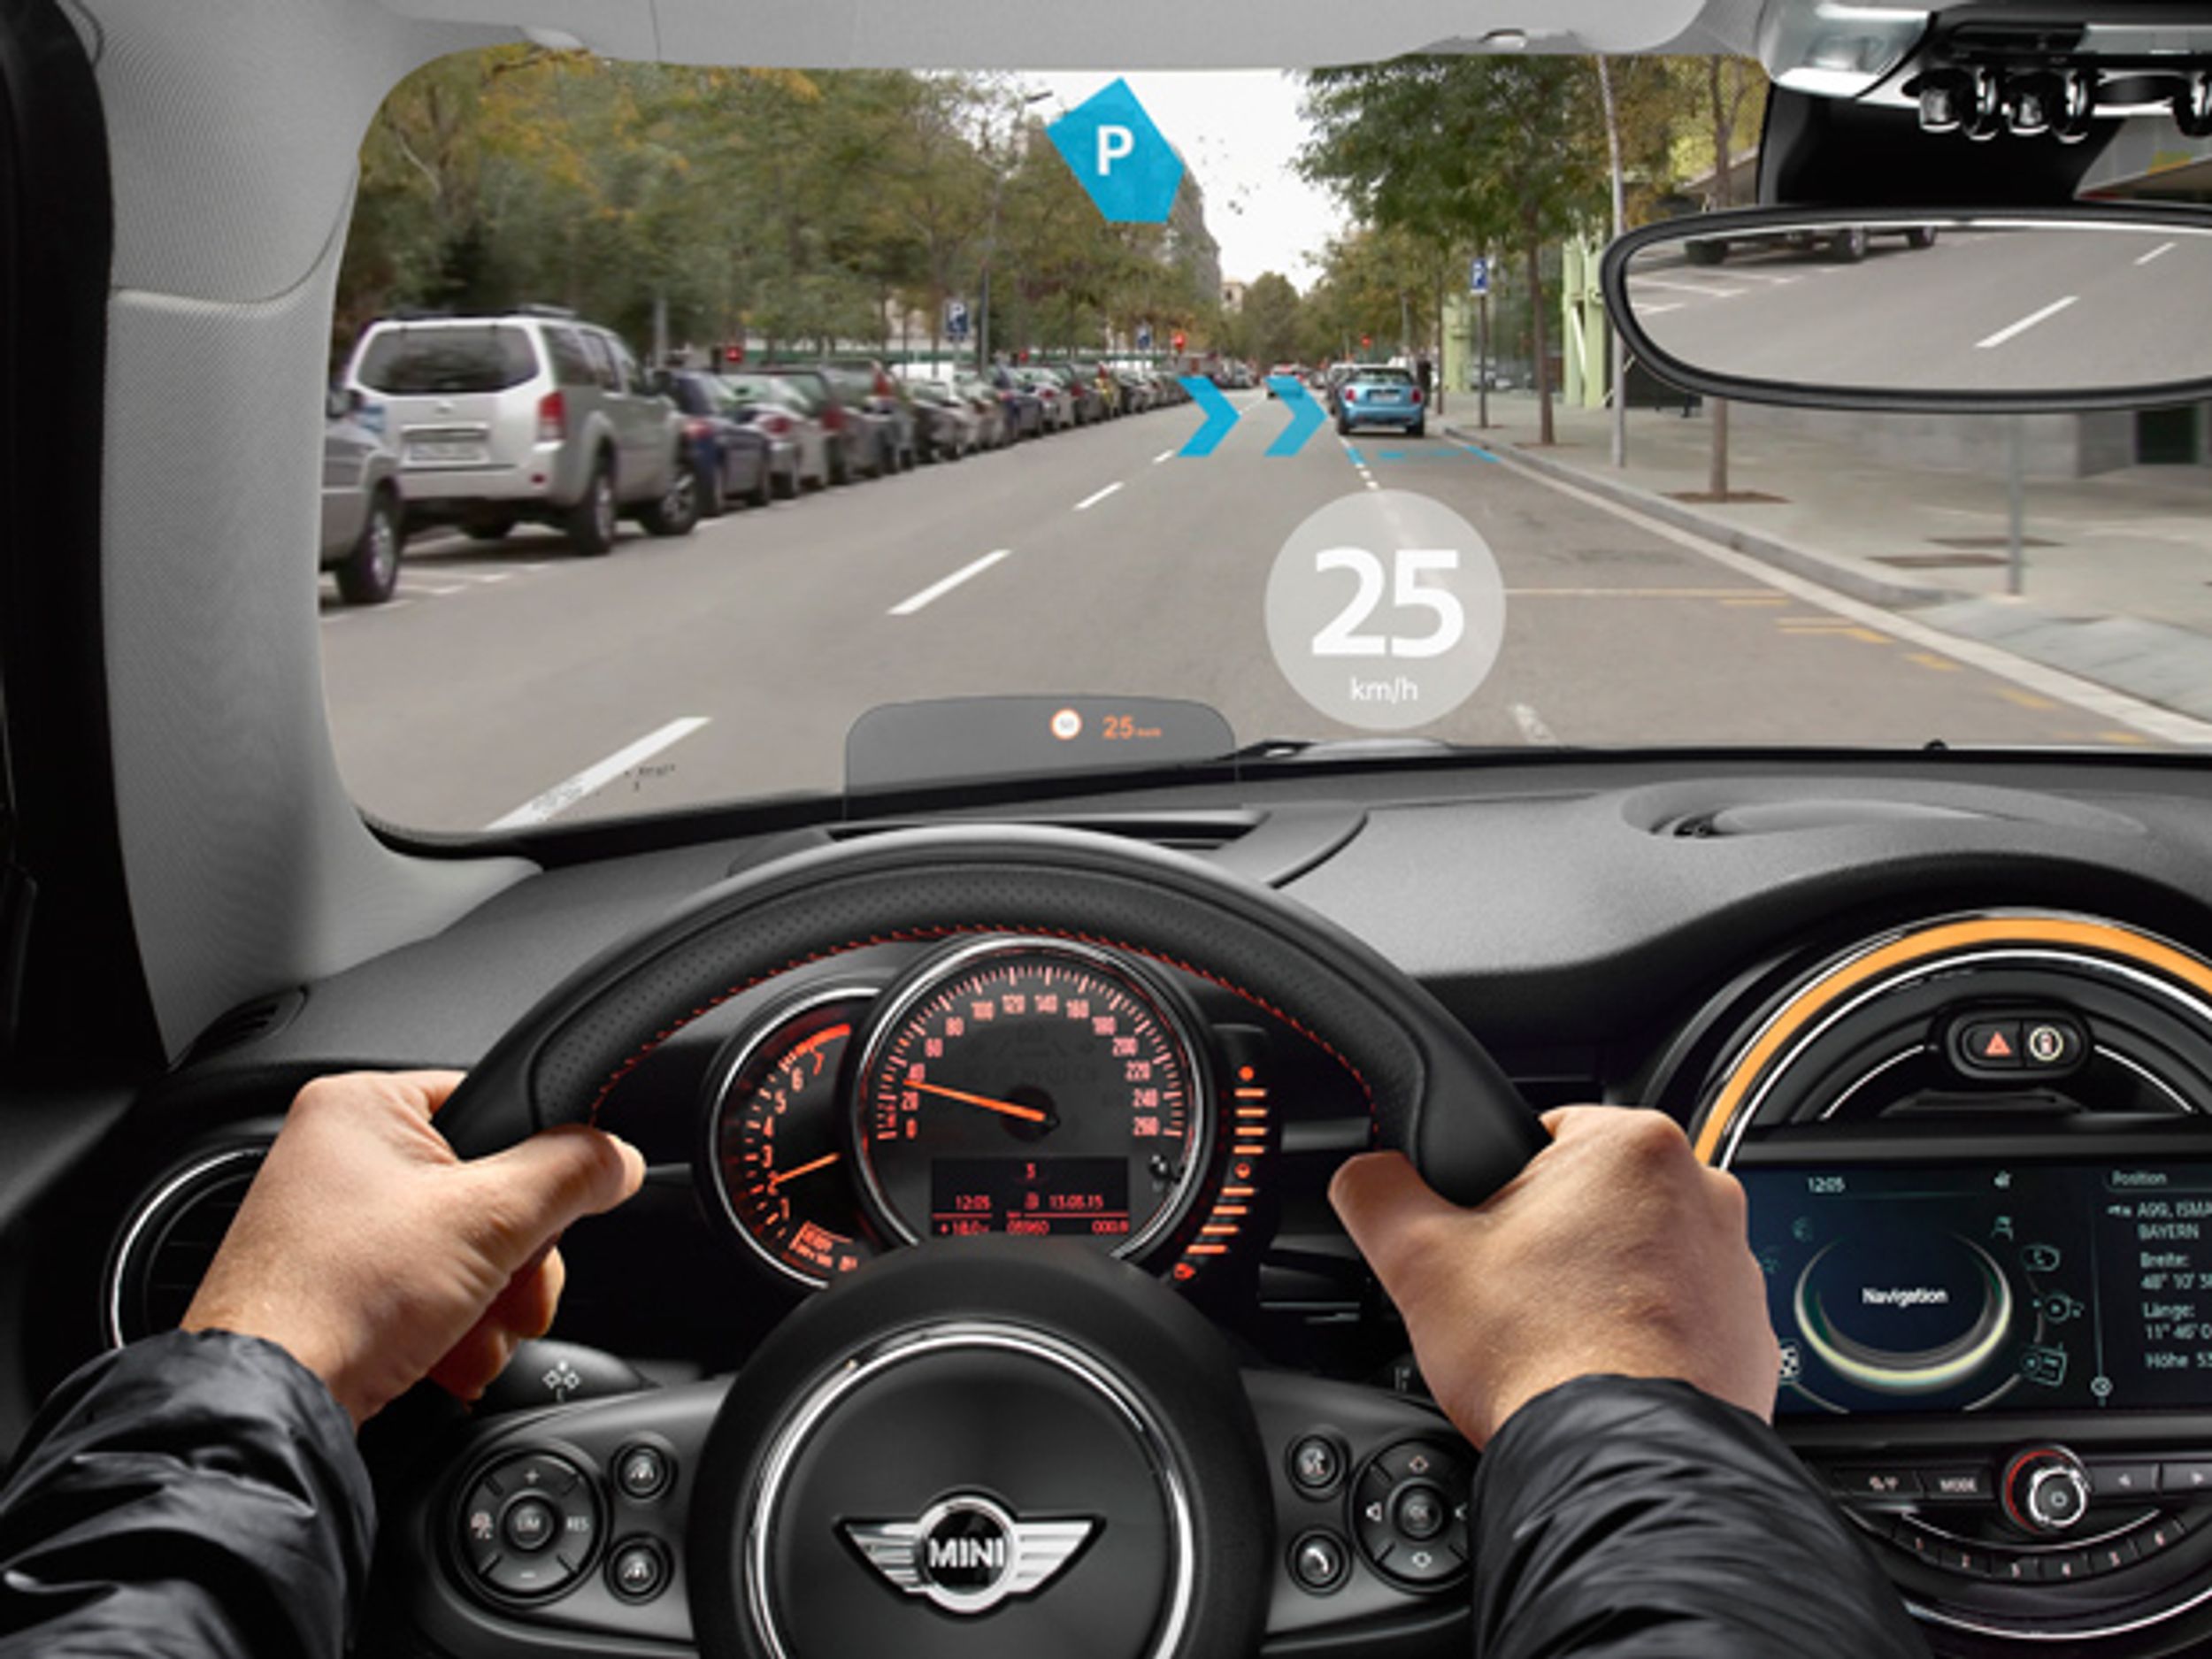 BMW's Mini Will Augment Your Vision